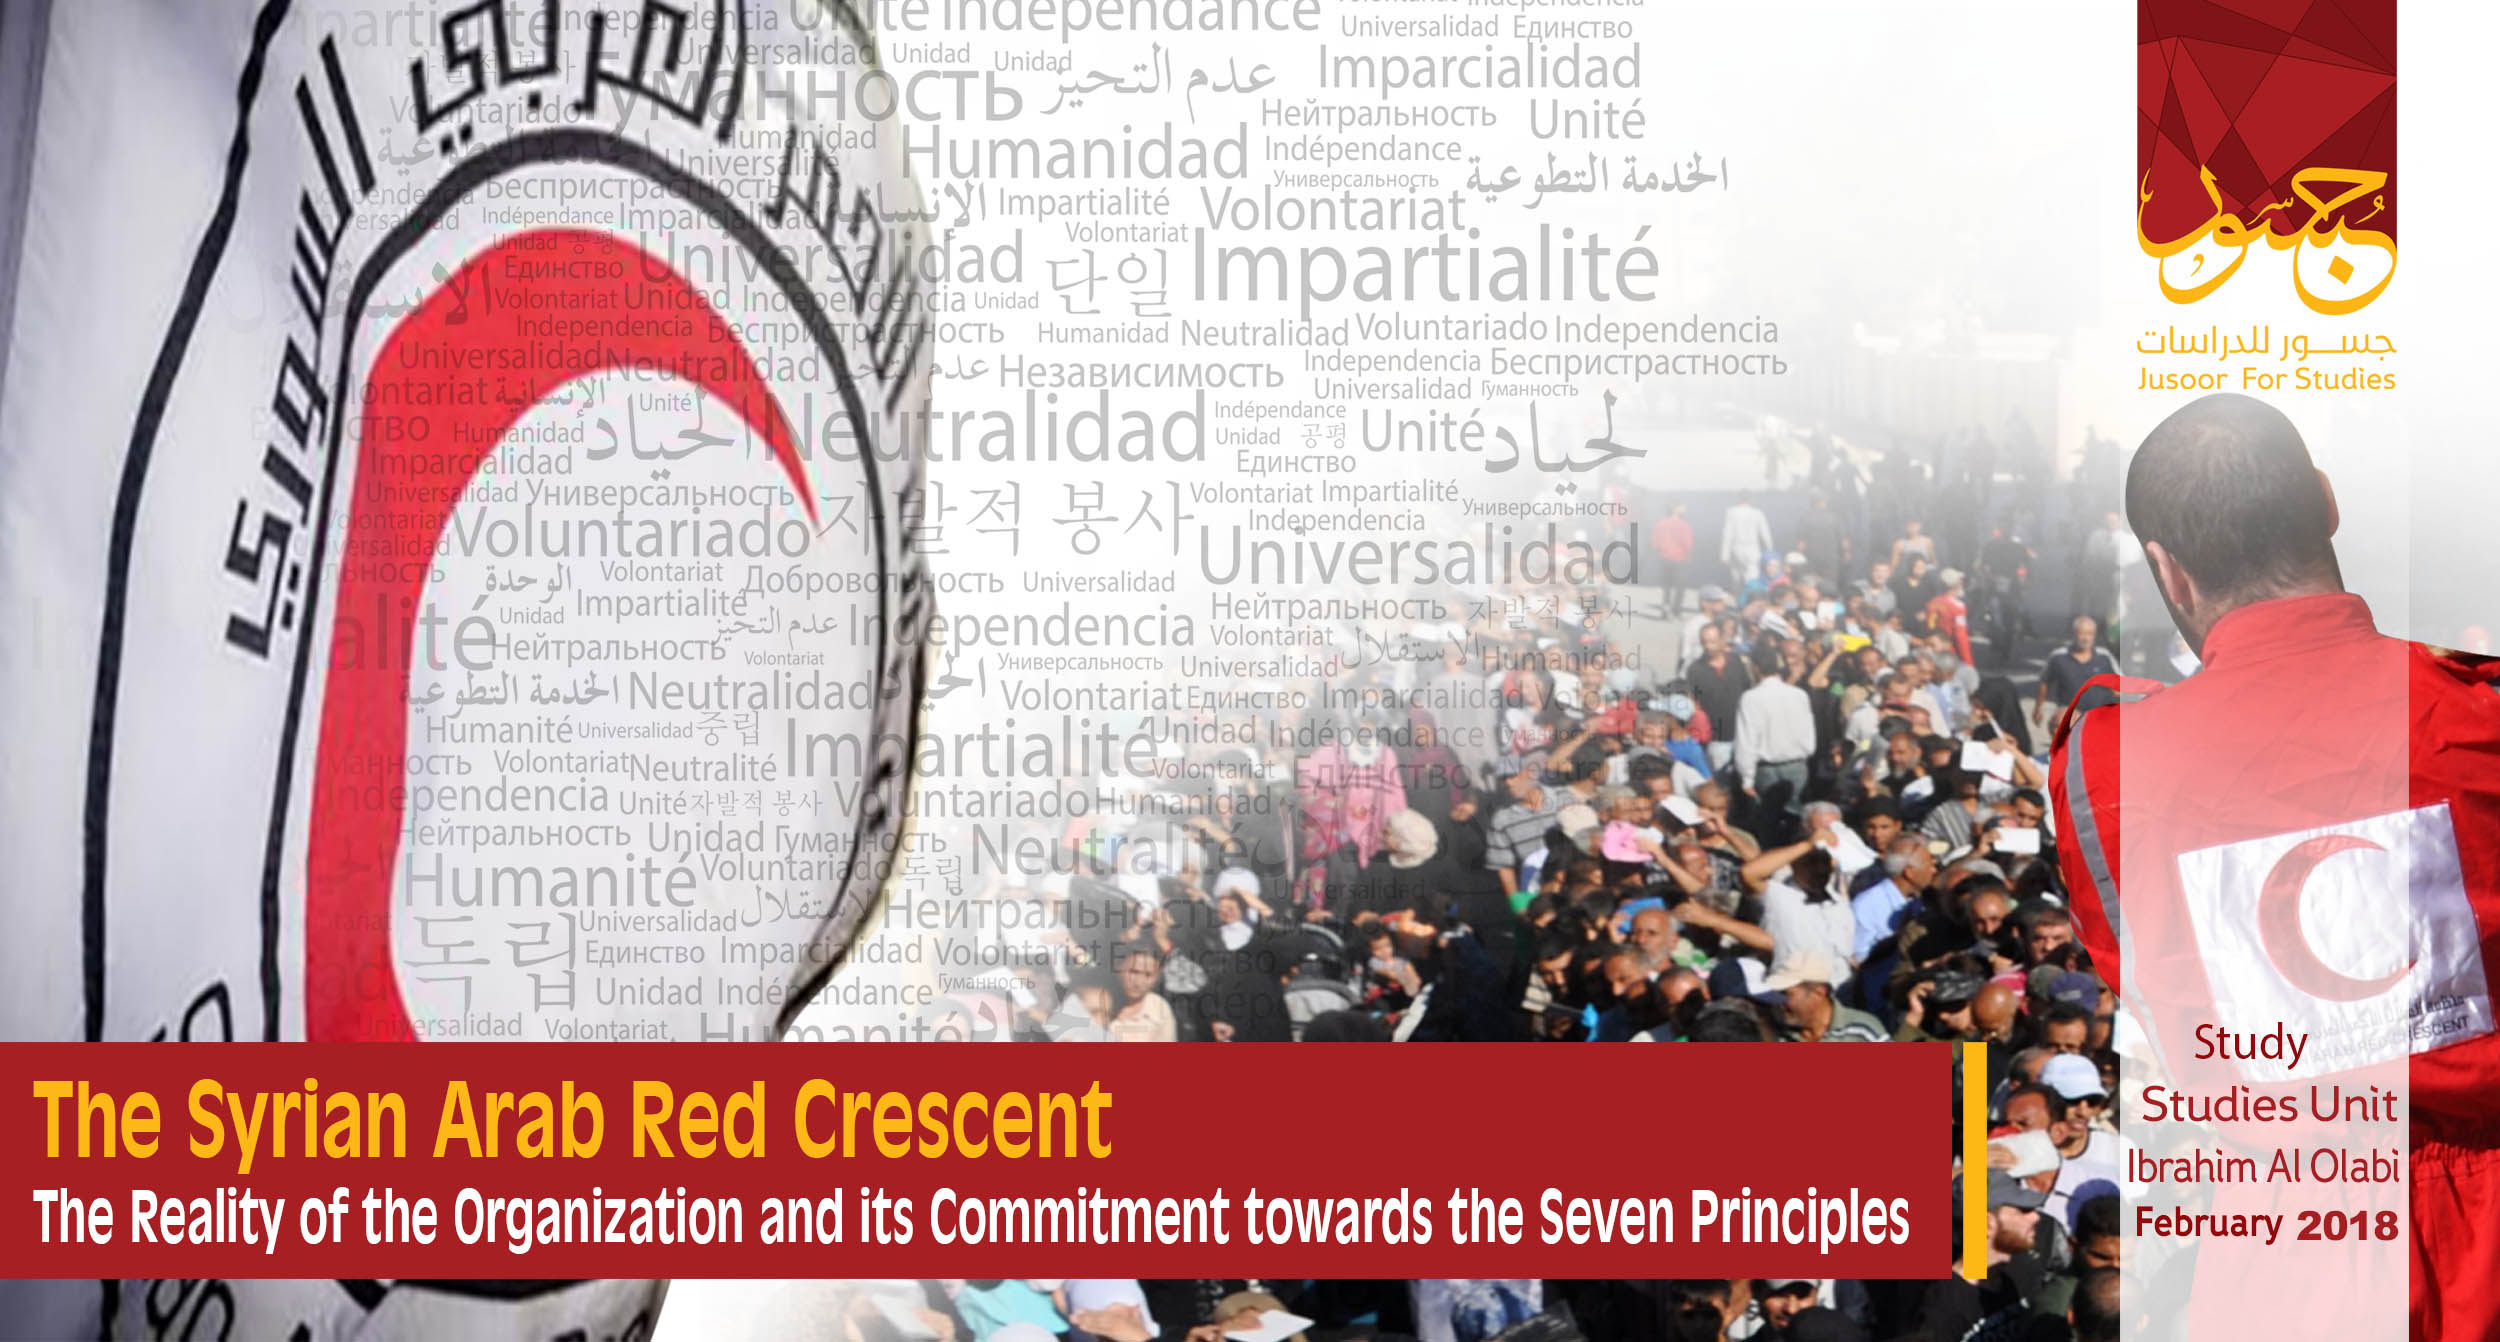 The Syrian Arab Red Crescent…The Reality of the Organization and its Commitment towards the Seven Principles